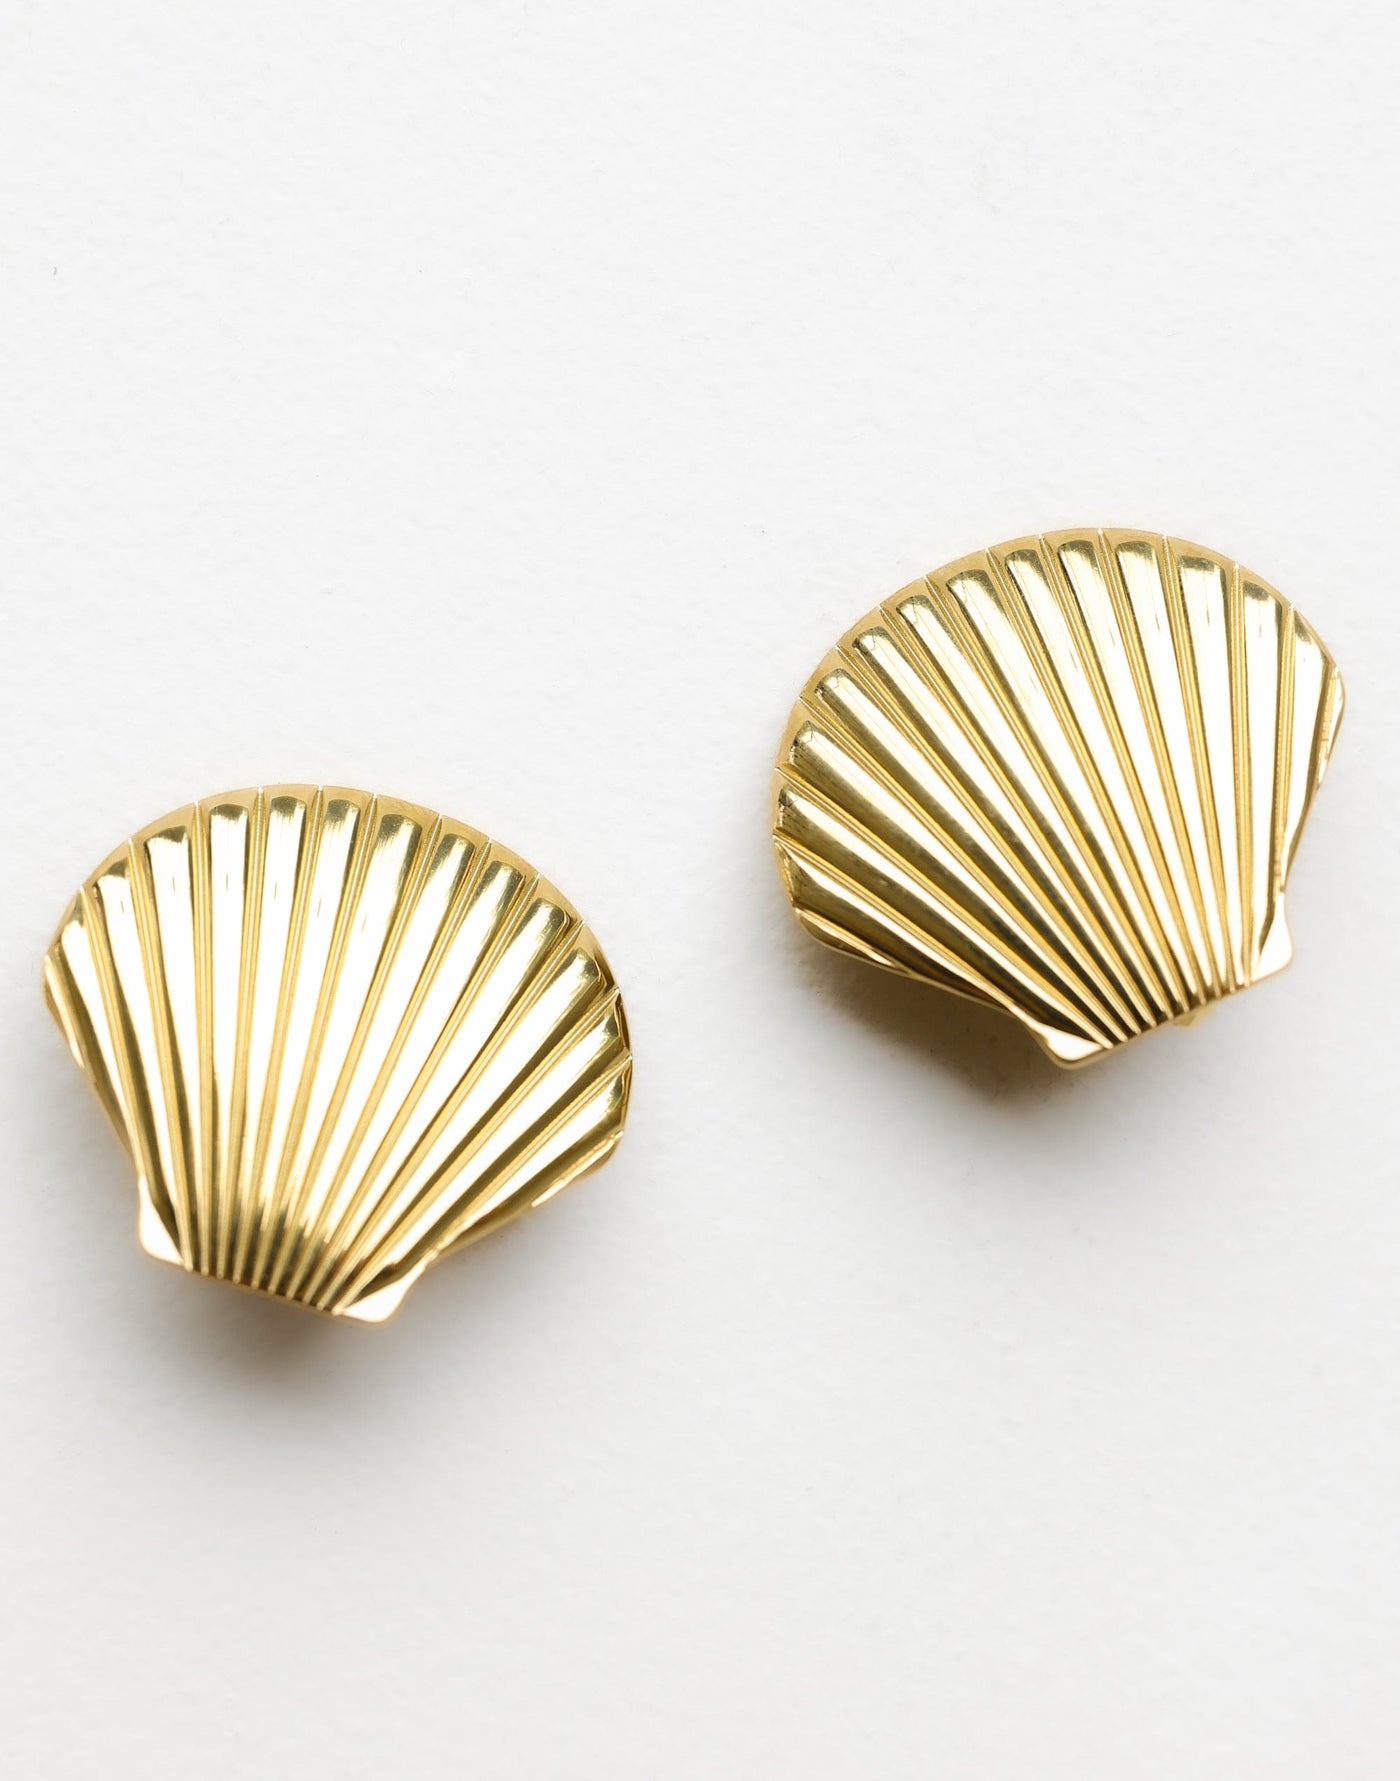 Marina Earrings (Gold) | CHARCOAL Exclusive - Scallop Shaped 18k Plated Stainless Steel Earrings - Women's Accessories - Charcoal Clothing